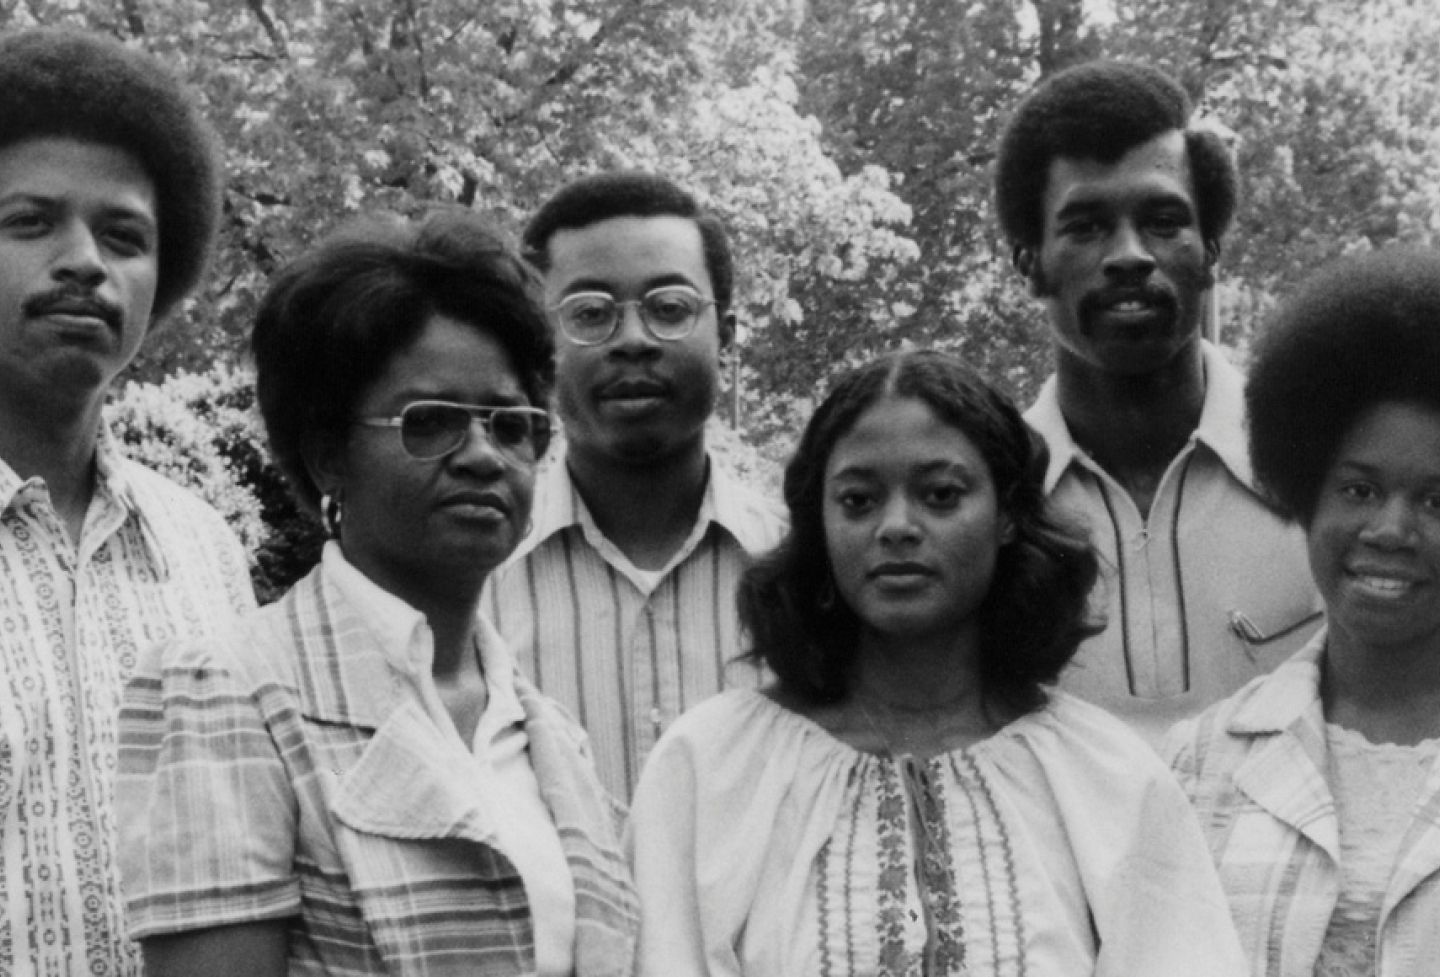 Members of the Law School’s Black American Law Students Association in 1974 included Ronald Reynolds Wesley ’75, Delores R. Boyd ’75, Kester I. Crosse ’75, Jan Freeman ’75, Dennis L. Montgomery ’75 and Sheila Jackson Lee ’75. Reynolds is currently a principal at Reynolds Wesley and a commis¬sioner in chancery of the Circuit Court of the city of Richmond, Virginia. Boyd is a retired U.S. magistrate judge in Alabama. Cross went on to practice in Delaware. Jackson Lee is currently the U.S. repre¬sentative for 